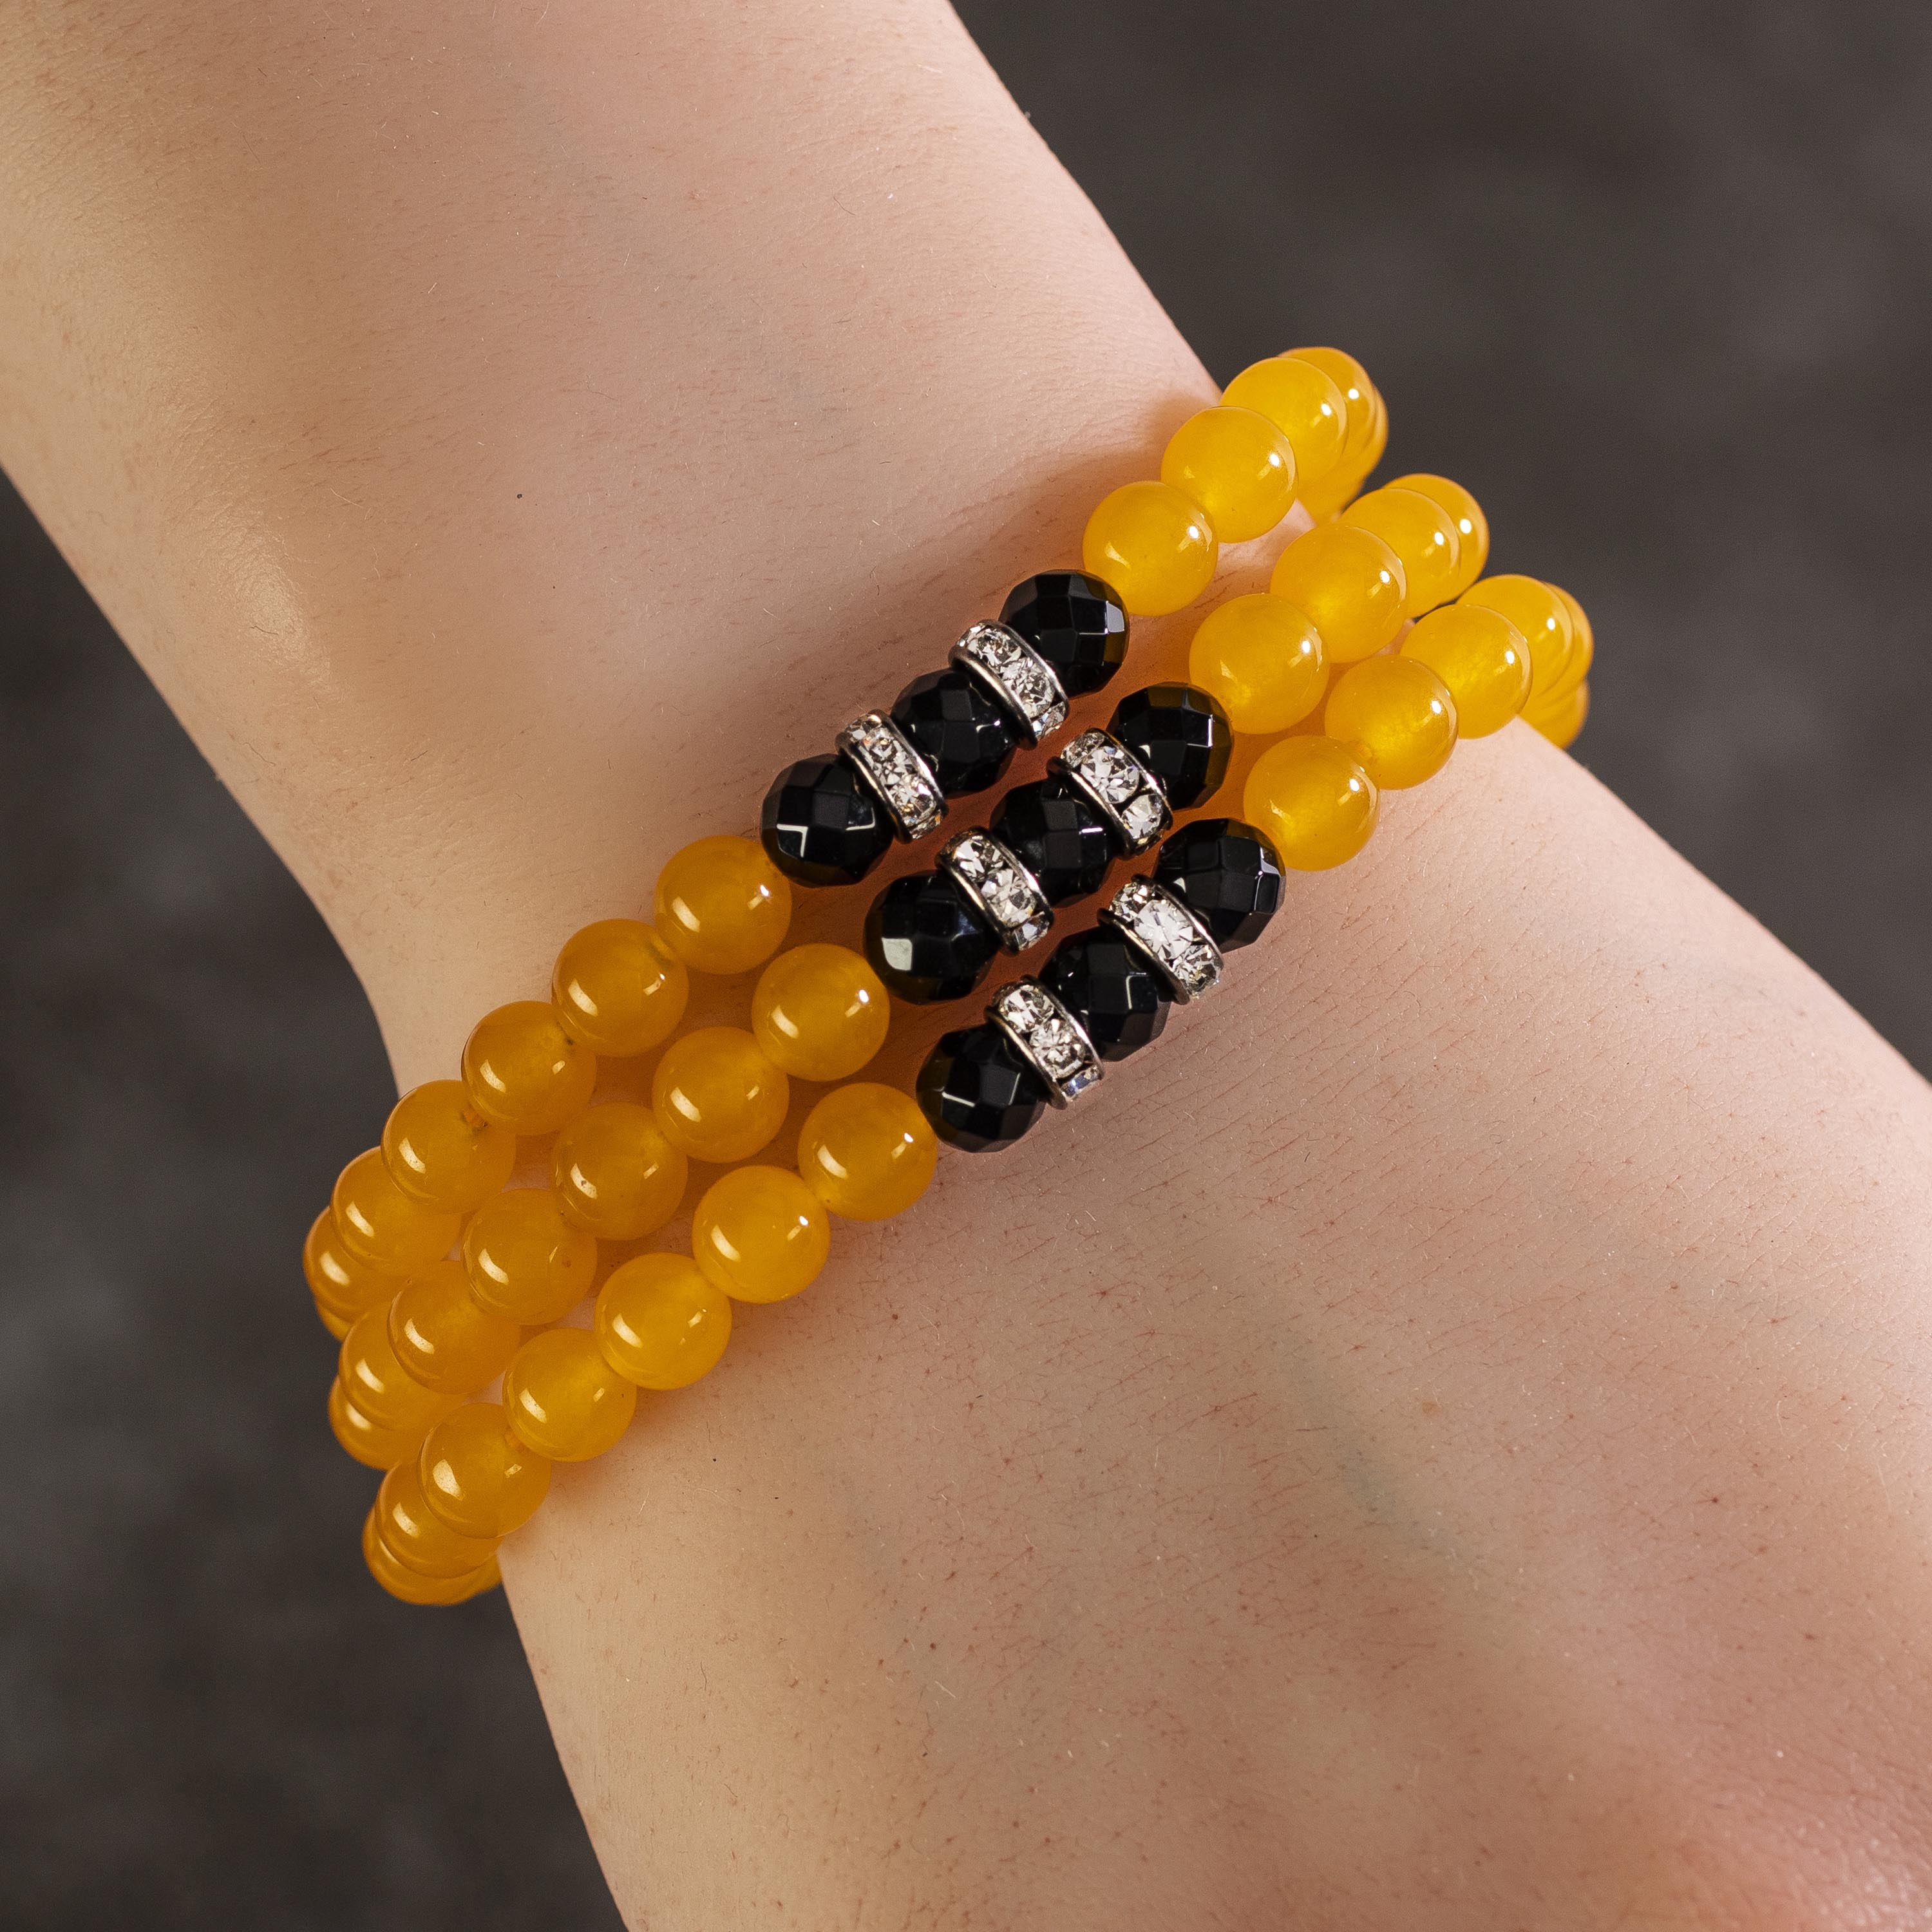 Kalifano Gemstone Bracelets Yellow Agate 6mm Beads with Black Agate and Silver Crystal Accent Beads Triple Wrap Elastic Gemstone Bracelet WHITE-BGI3-065